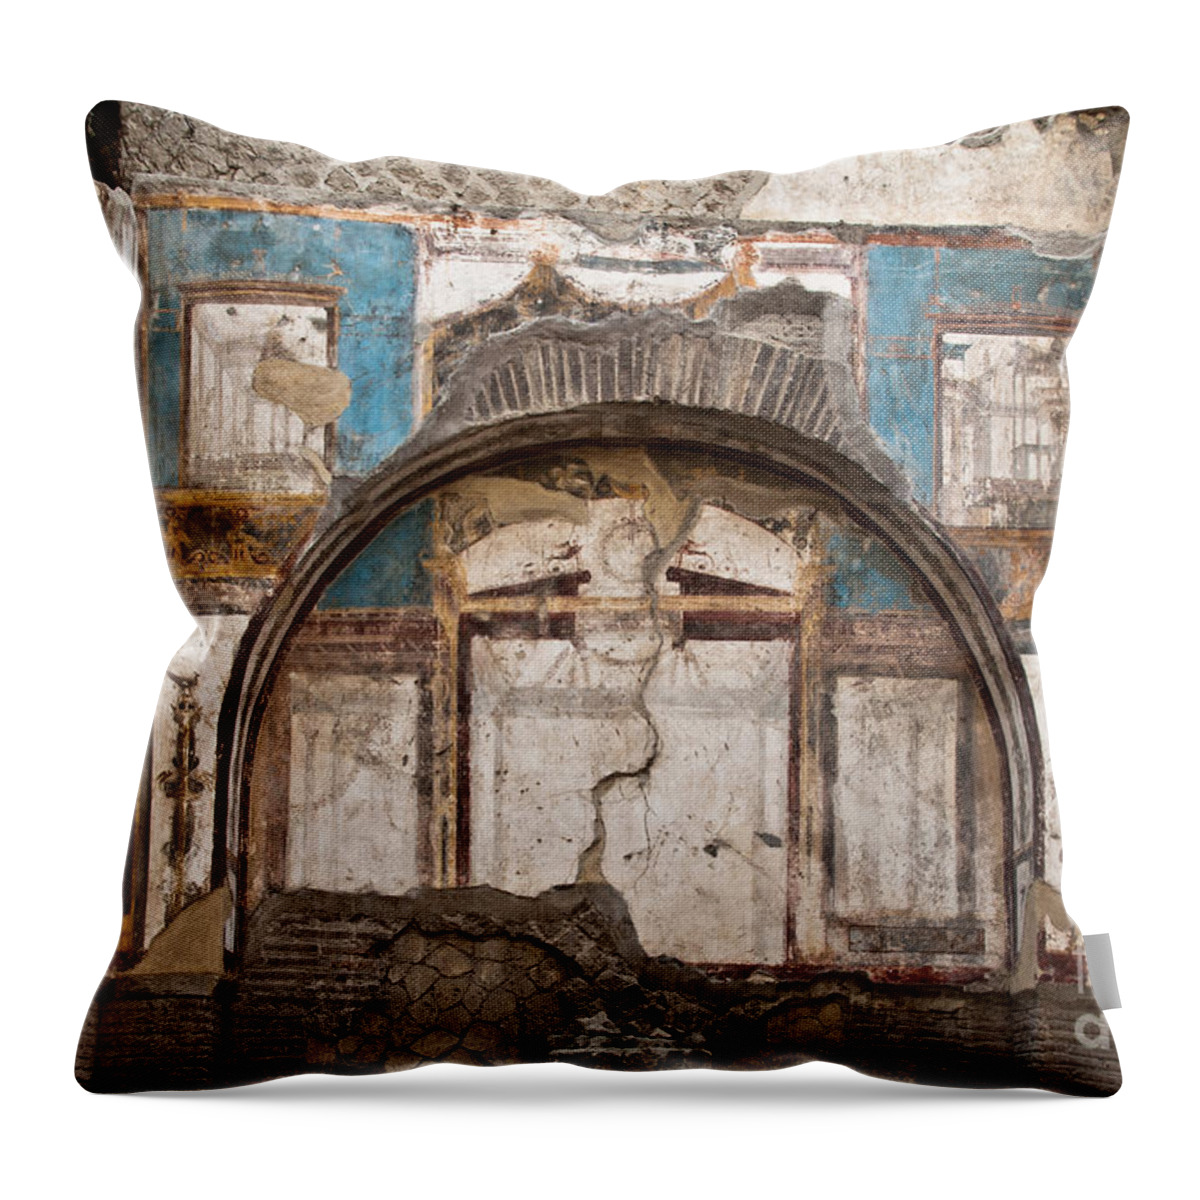 Herculaneum Throw Pillow featuring the photograph Old Glory by Marion Galt